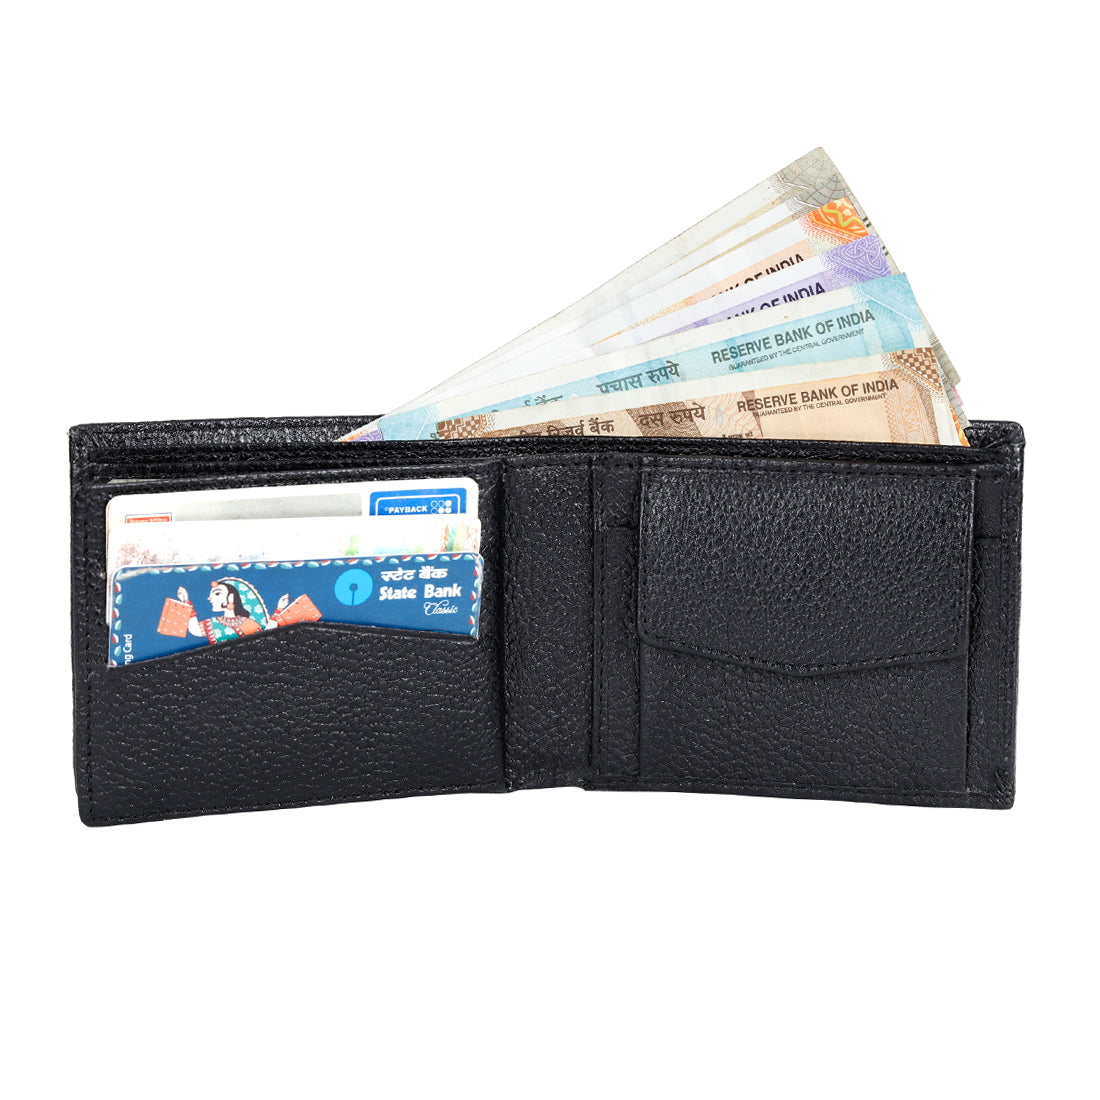 Luxurious Genuine Grainy Leather Wallet for Men